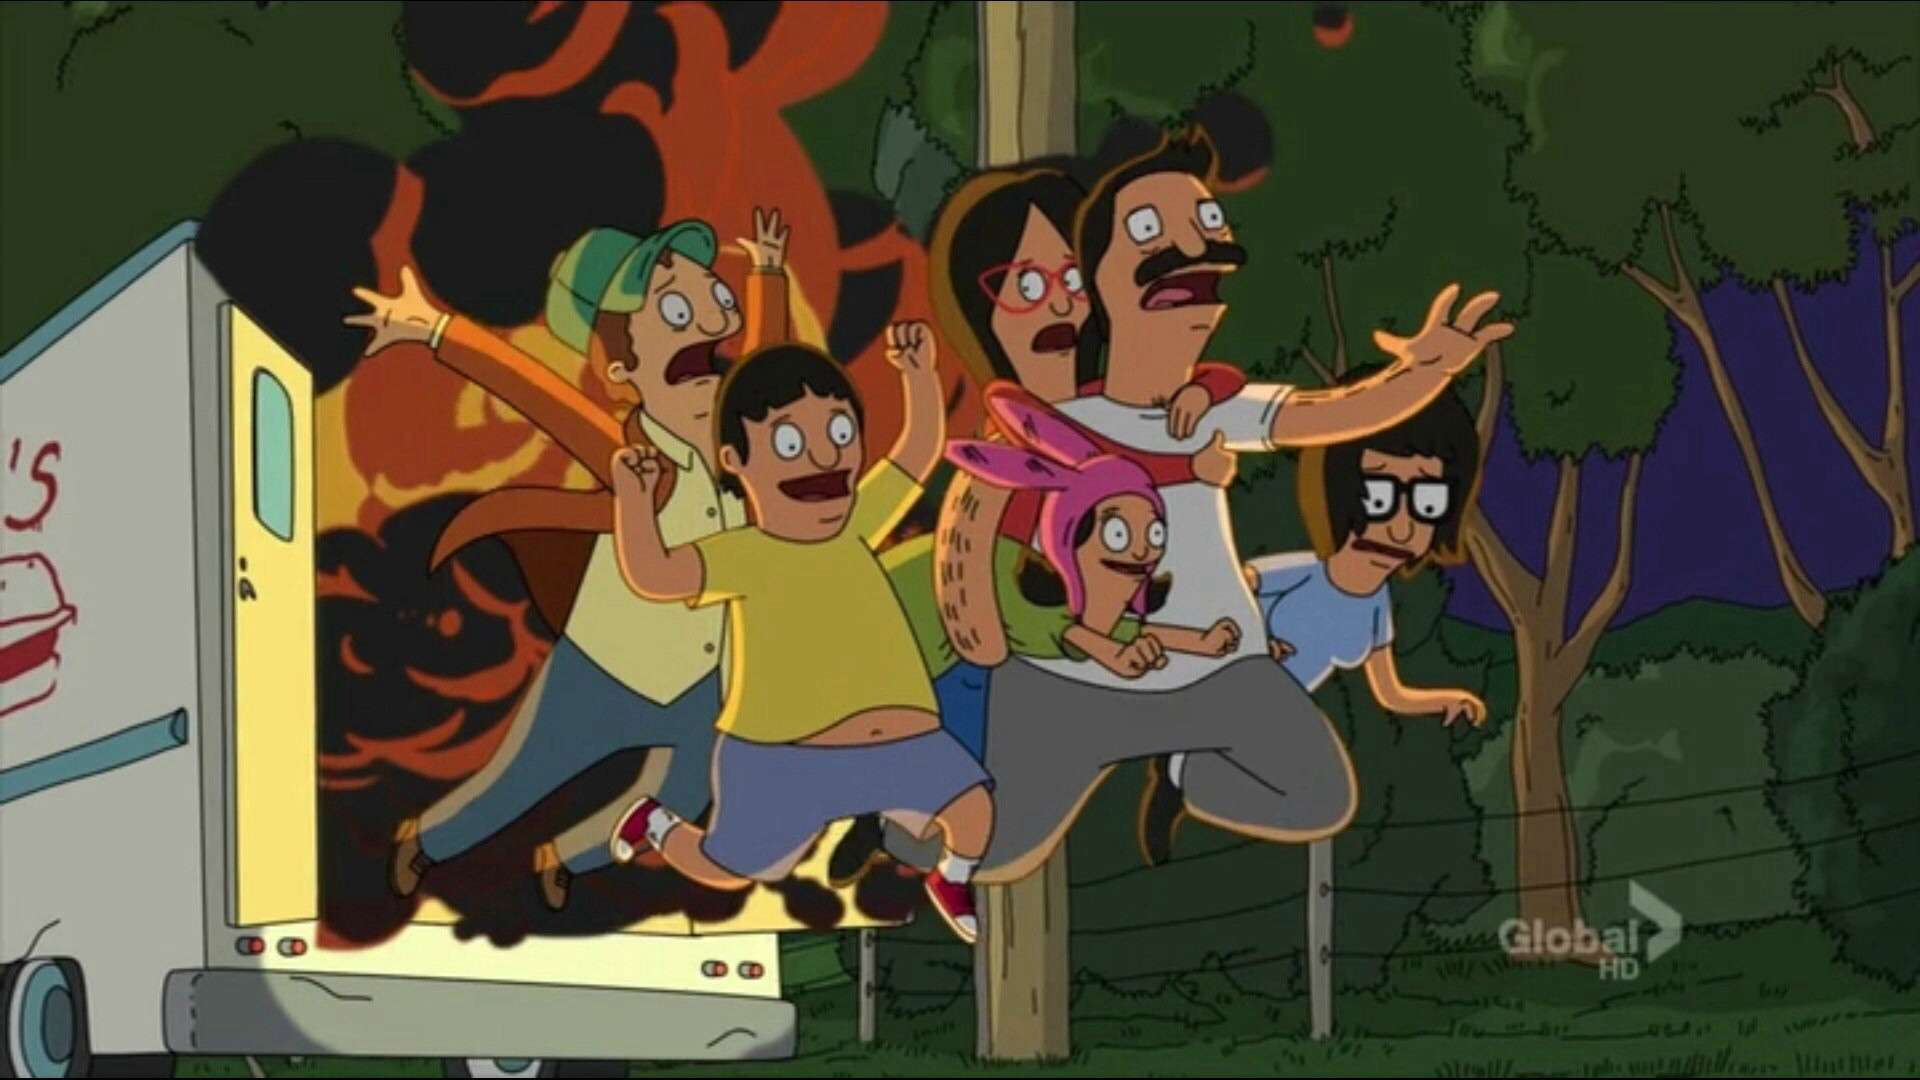 Bobs Burgers Food Truck meets an untimely fiery end